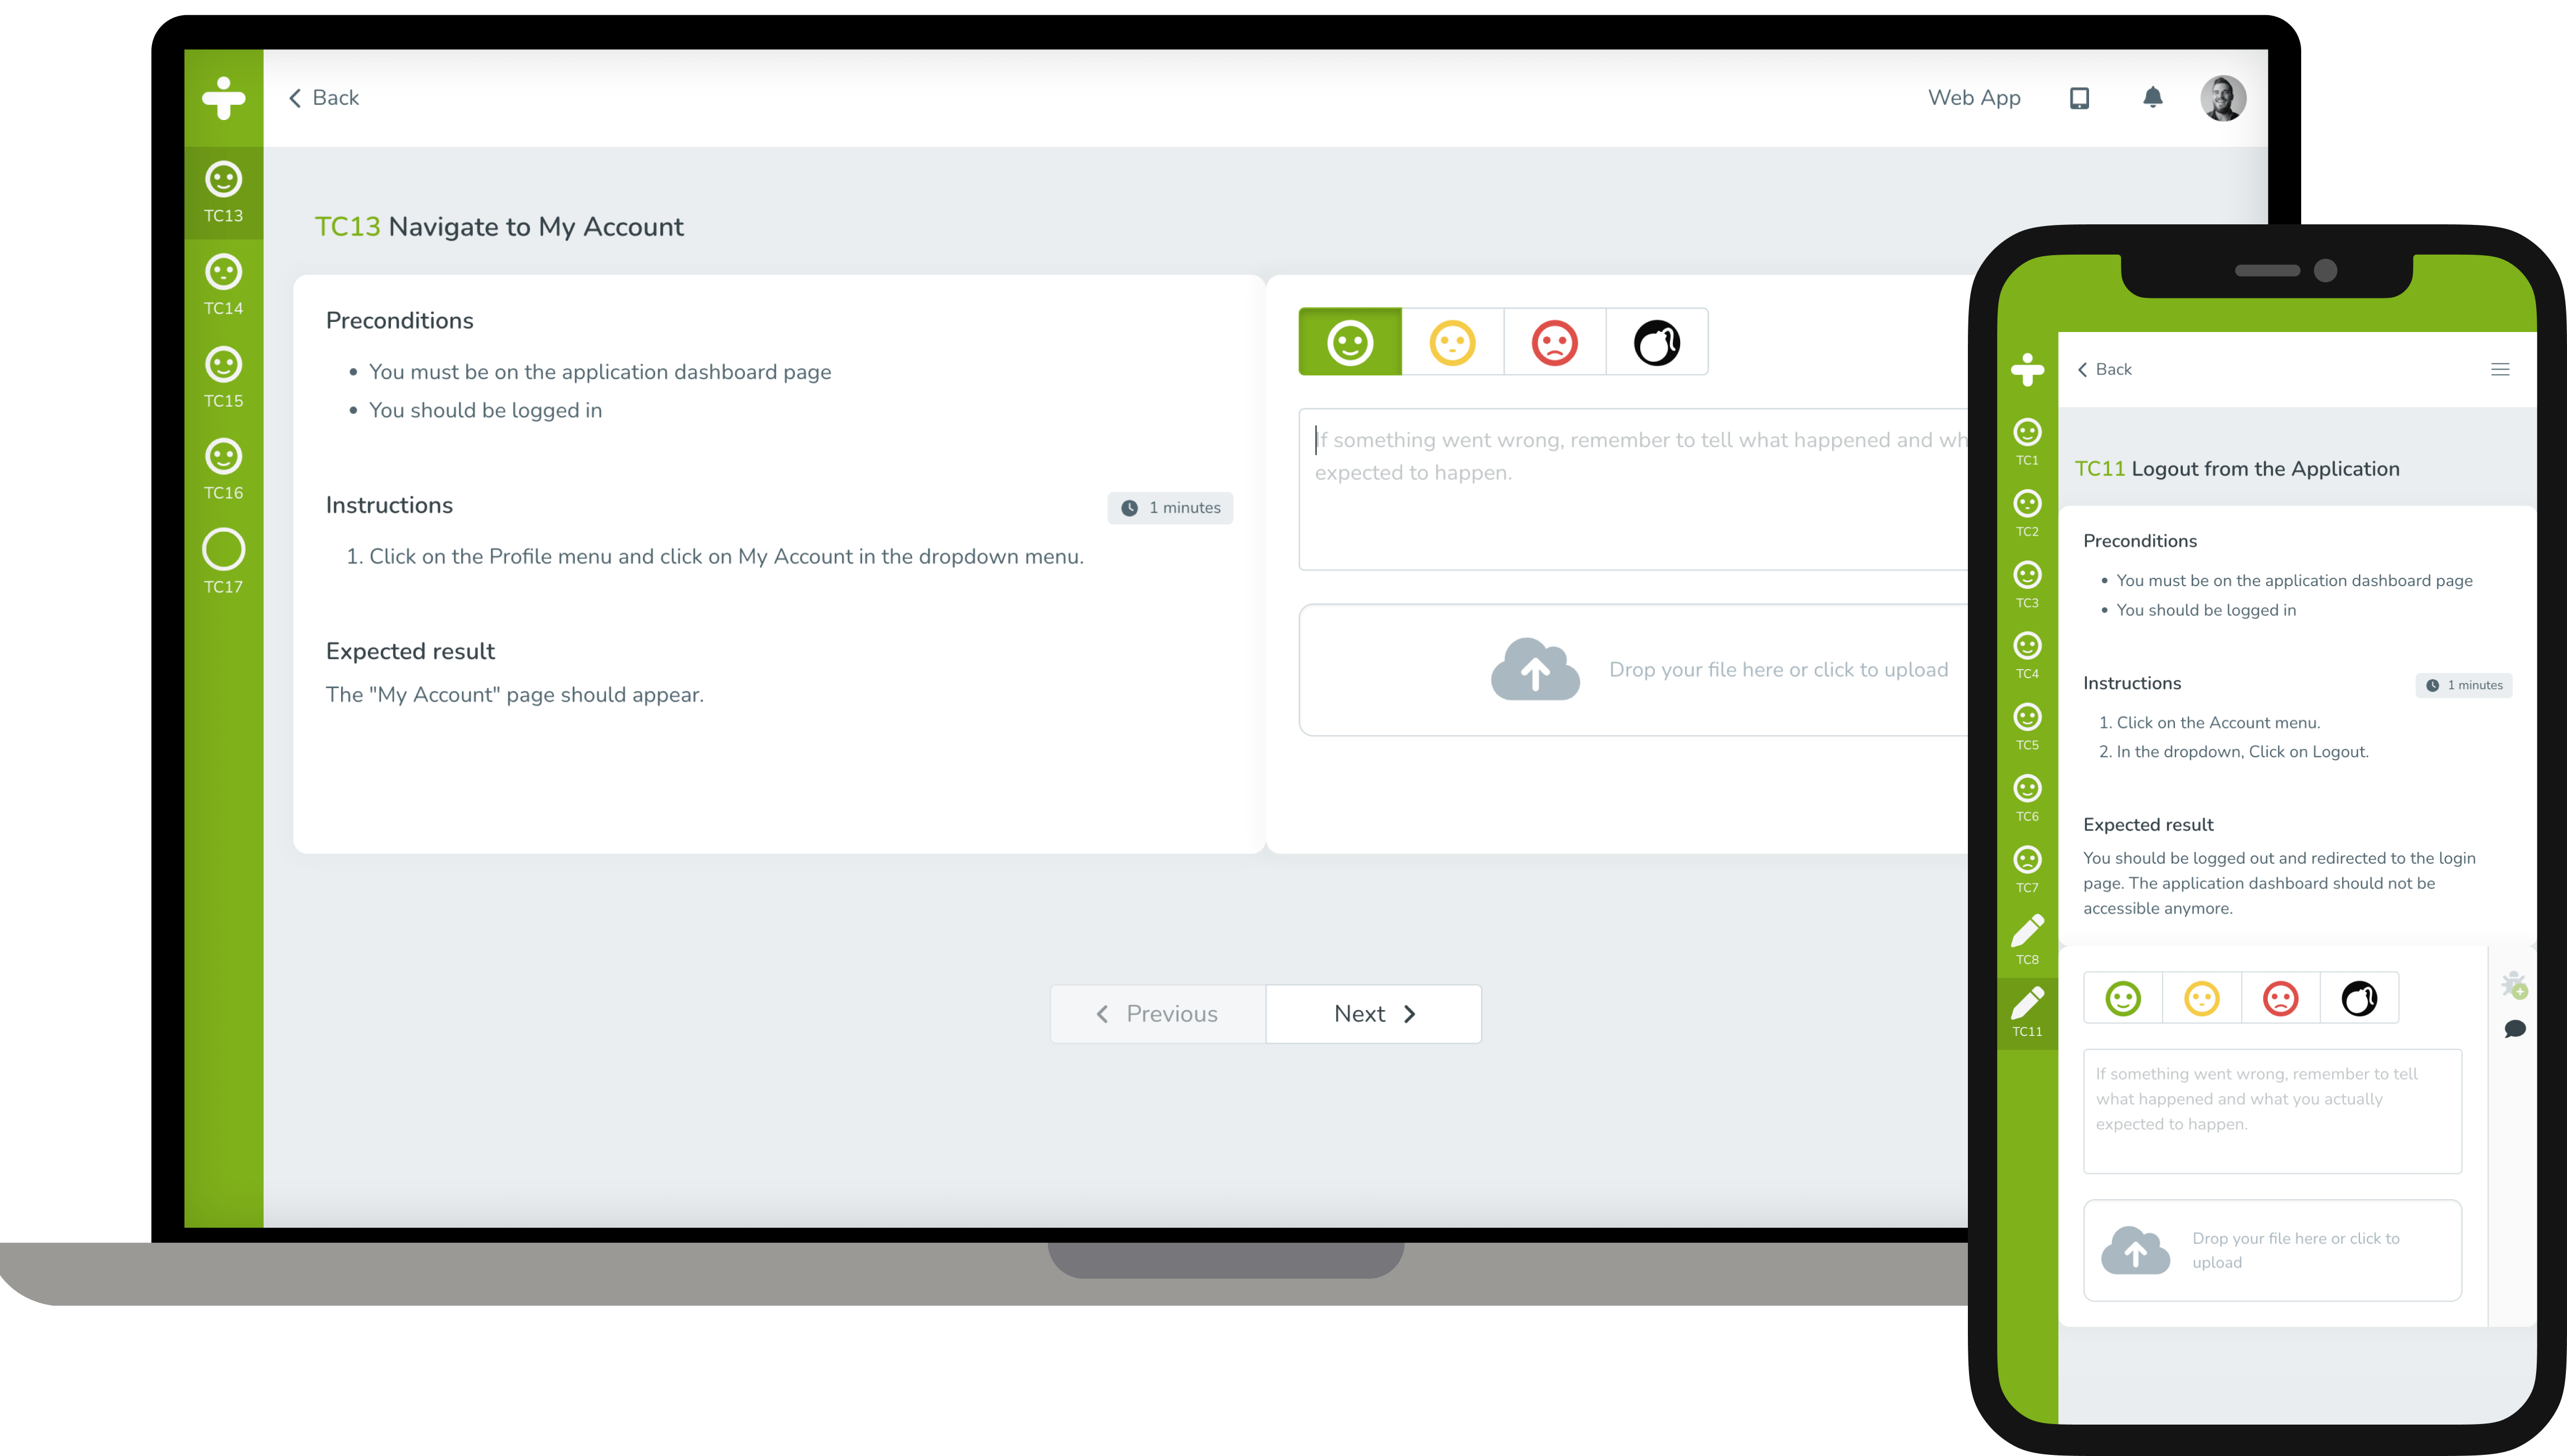 Utilize TestMonitor’s secure cloud platform to run tests via tablets, mobile devices, or computers, making it easy to test wherever and whenever